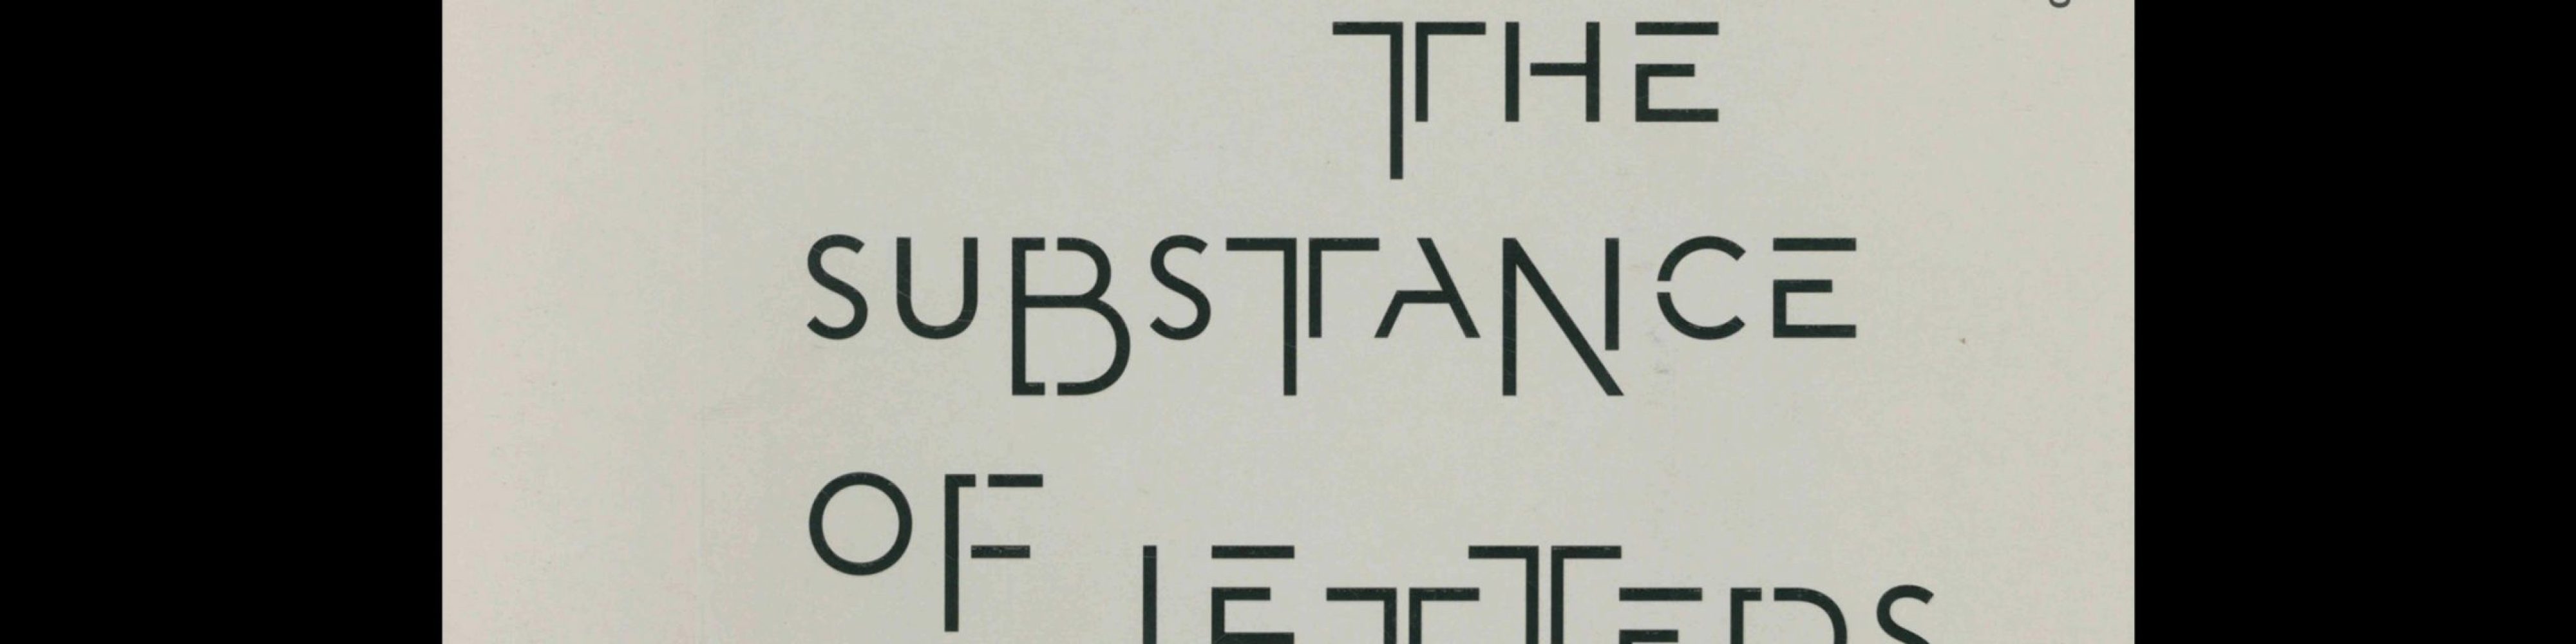 Philippe Apeloig - The Substance of Letters, 2015